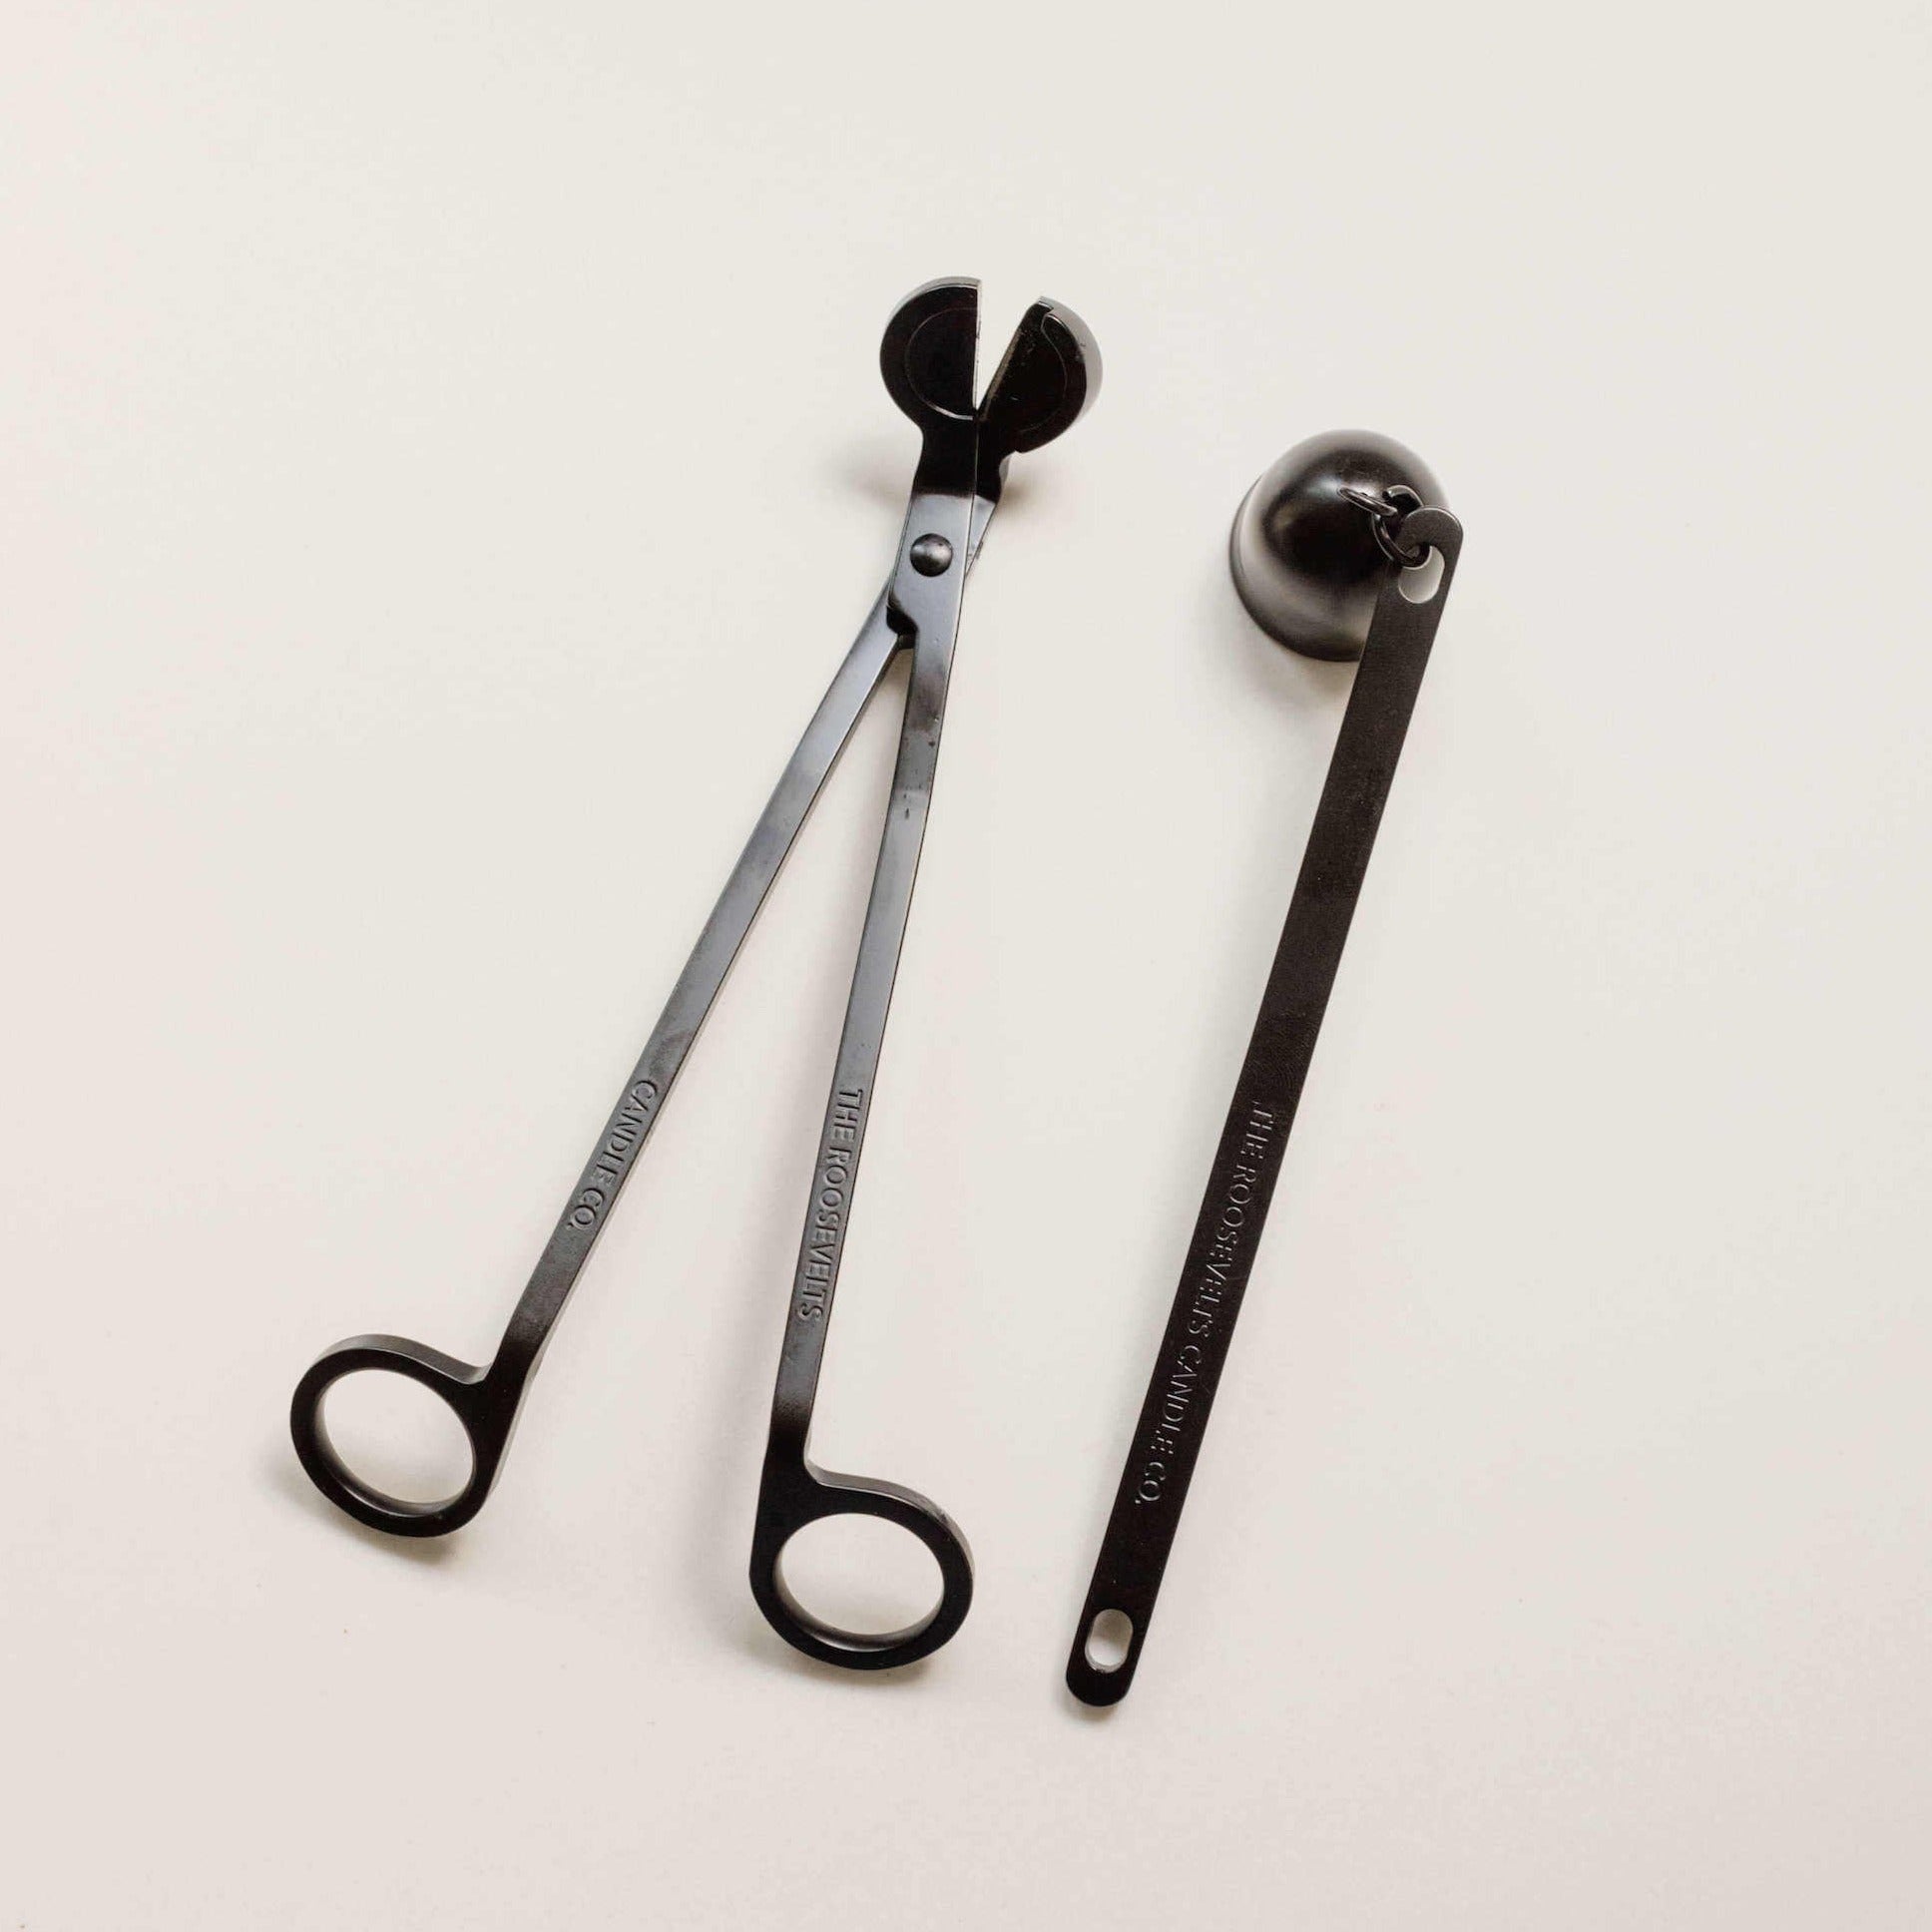 Matte Black Candle Snuffer - The Roosevelts Candle Co.